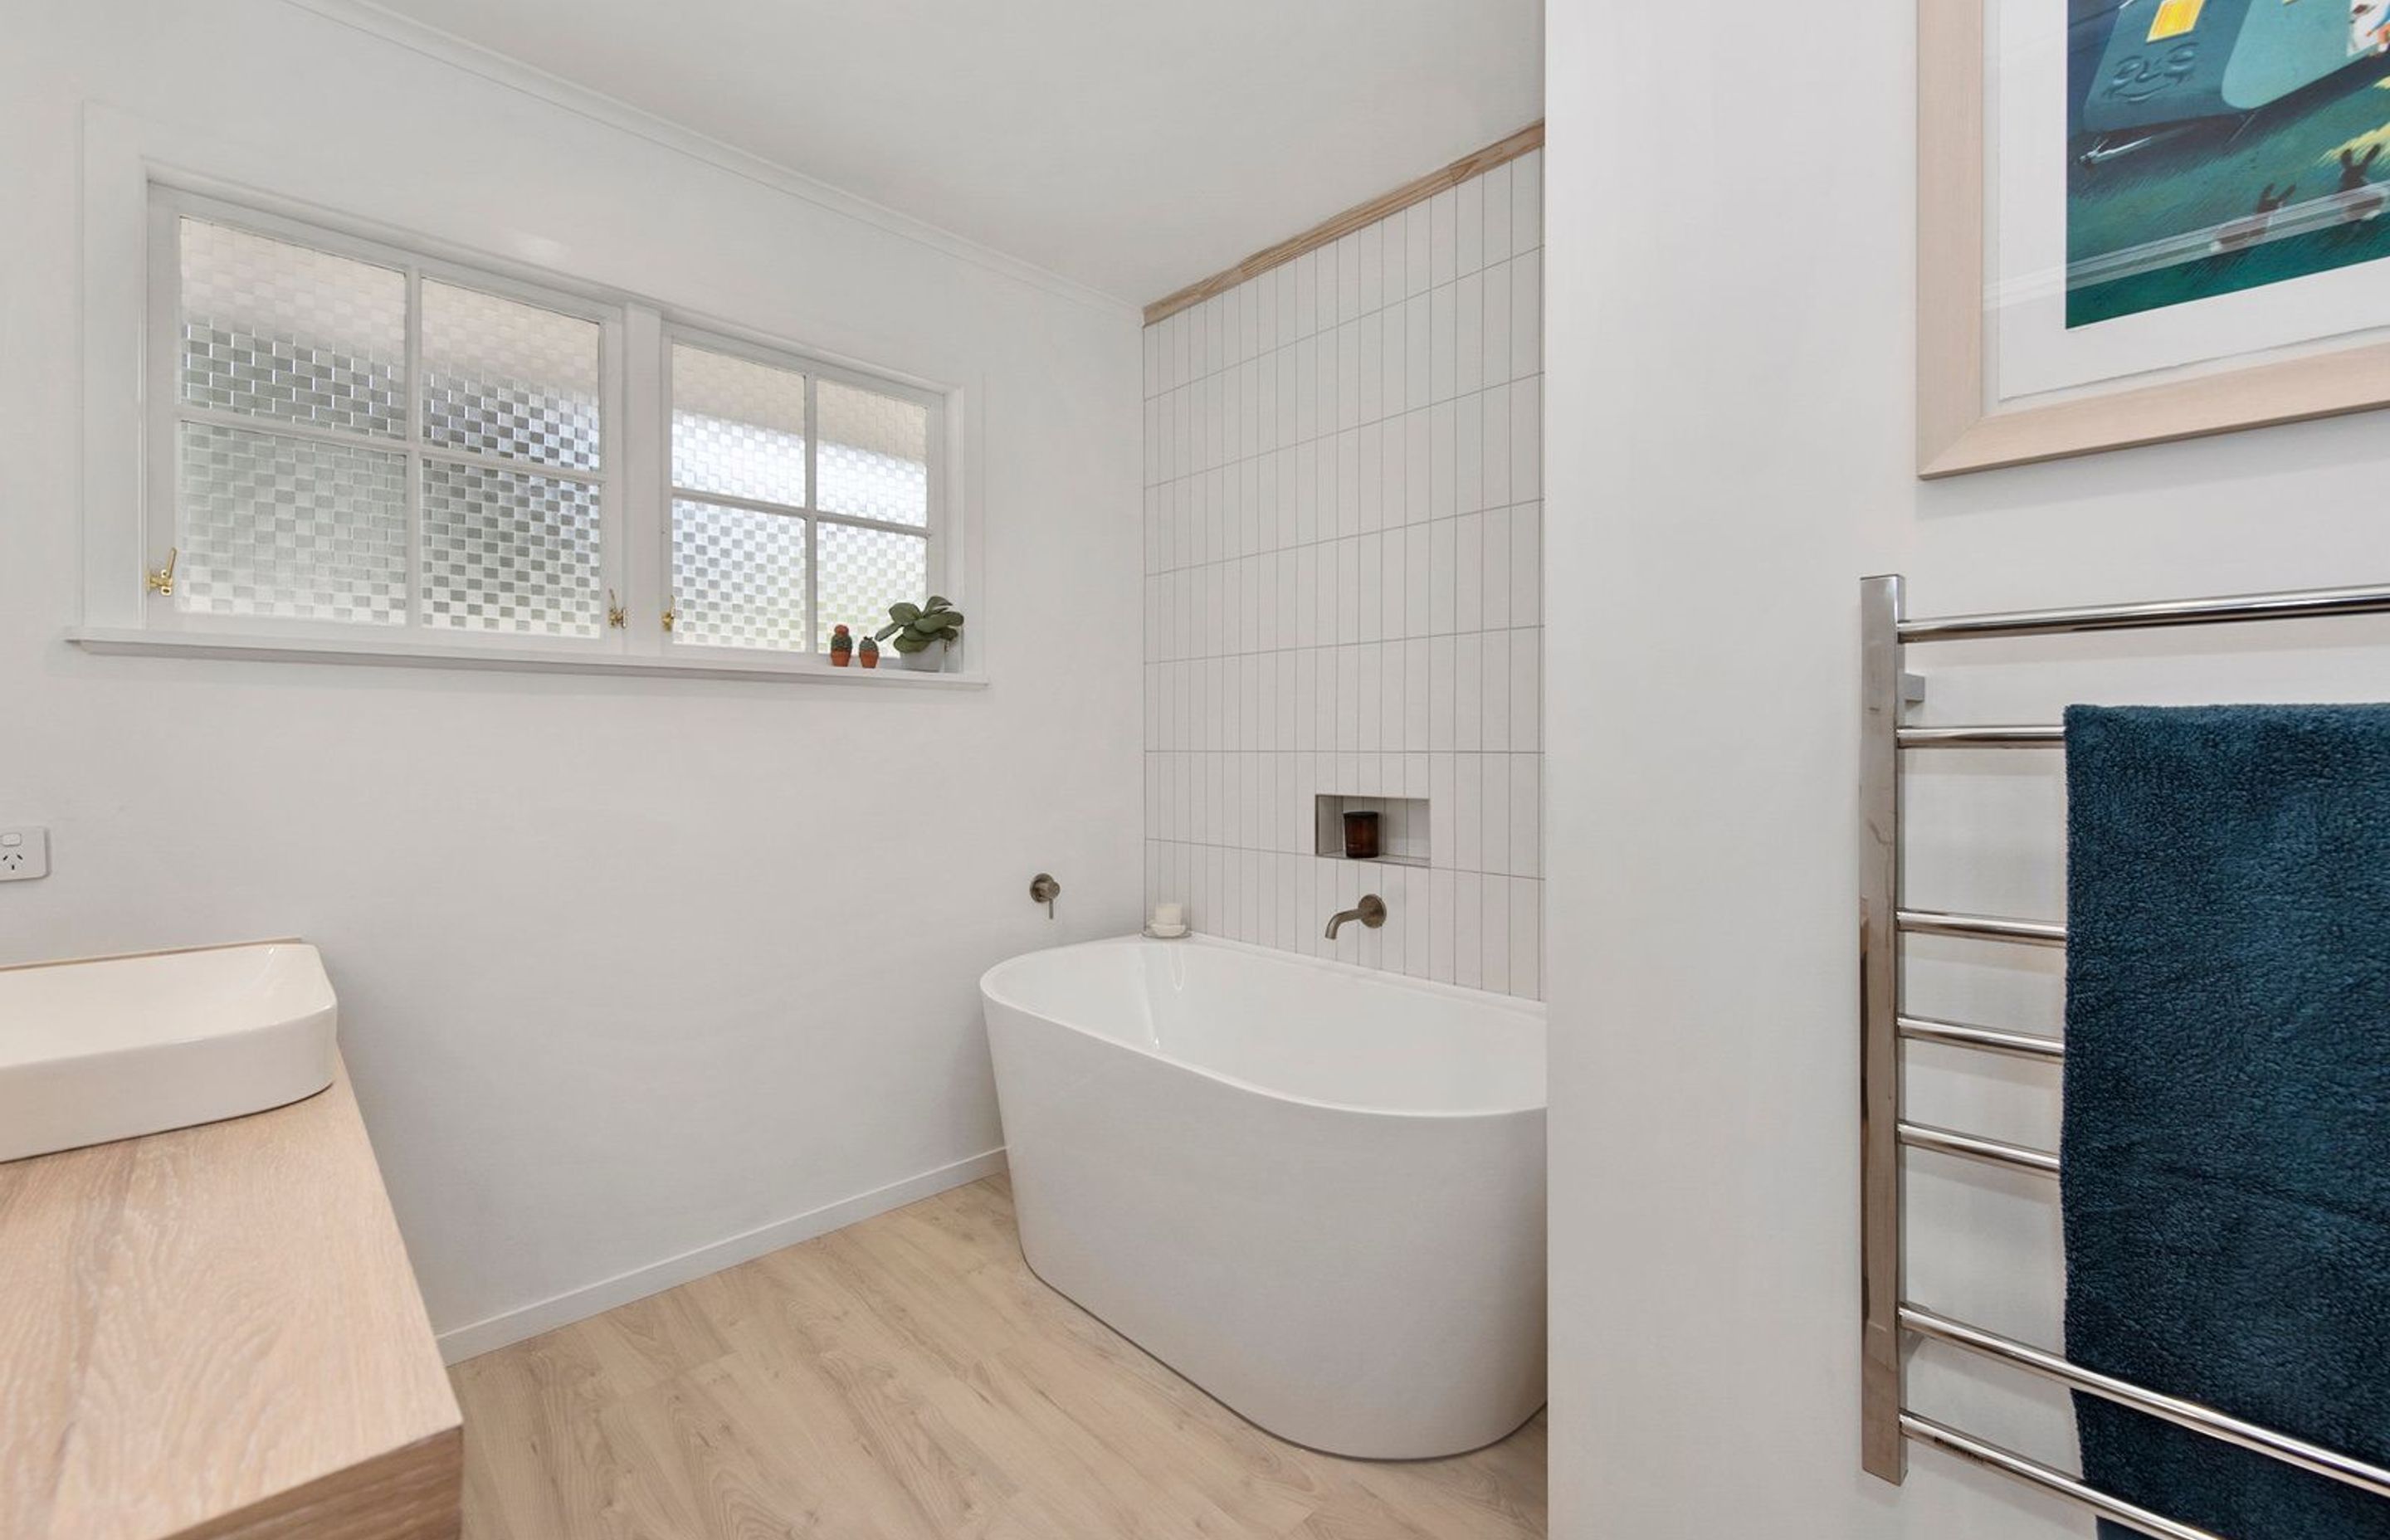 A Lovely Pair of Bathrooms and a Functional Laundry Unit